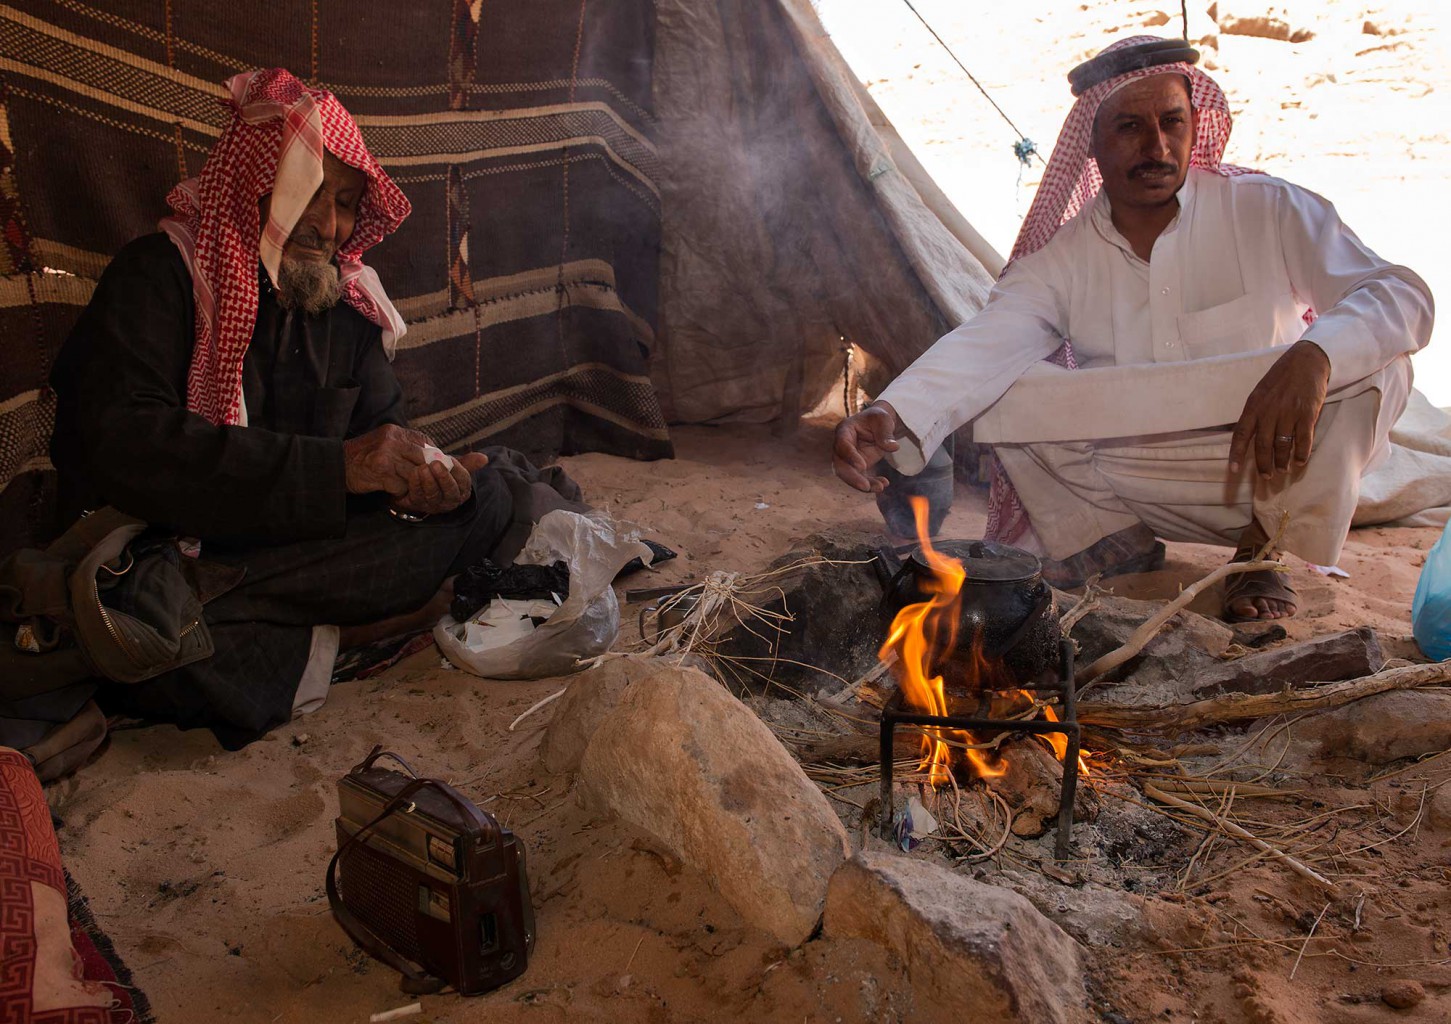 Friendly Hospitality at a Beduin Home in Wadi Rum